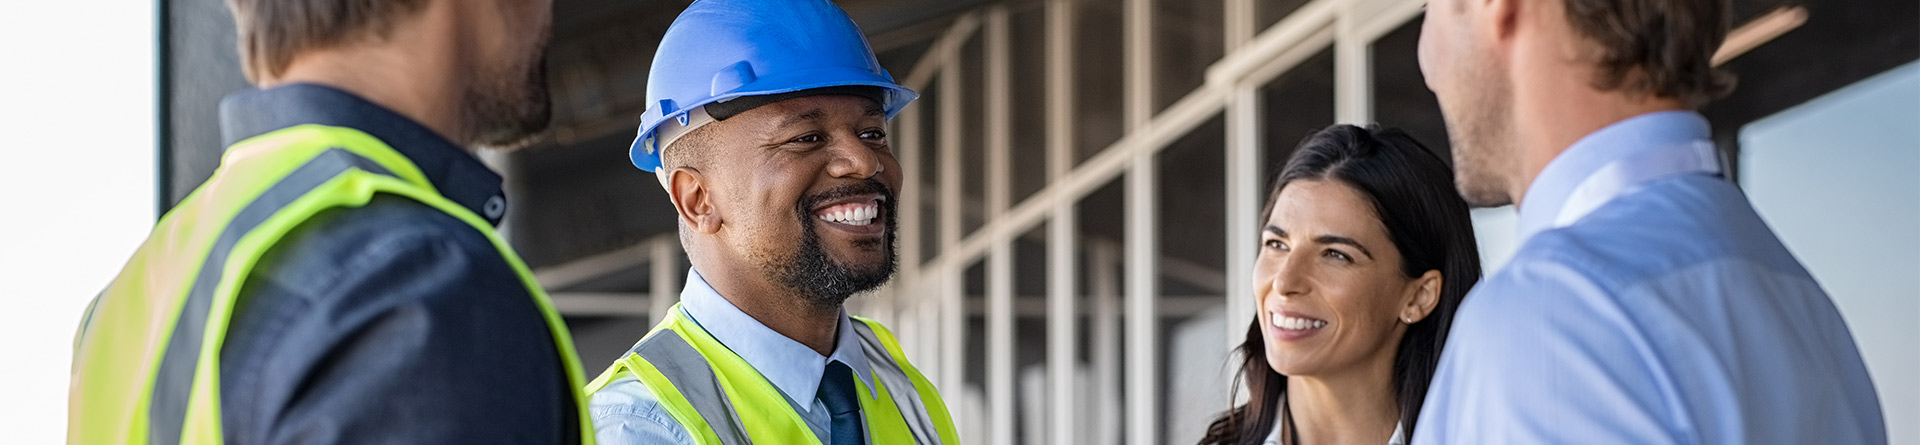 International Code Council and American Society of Home Inspectors Collaborate to Diversify Workforce and Equip Building Professionals for the Future